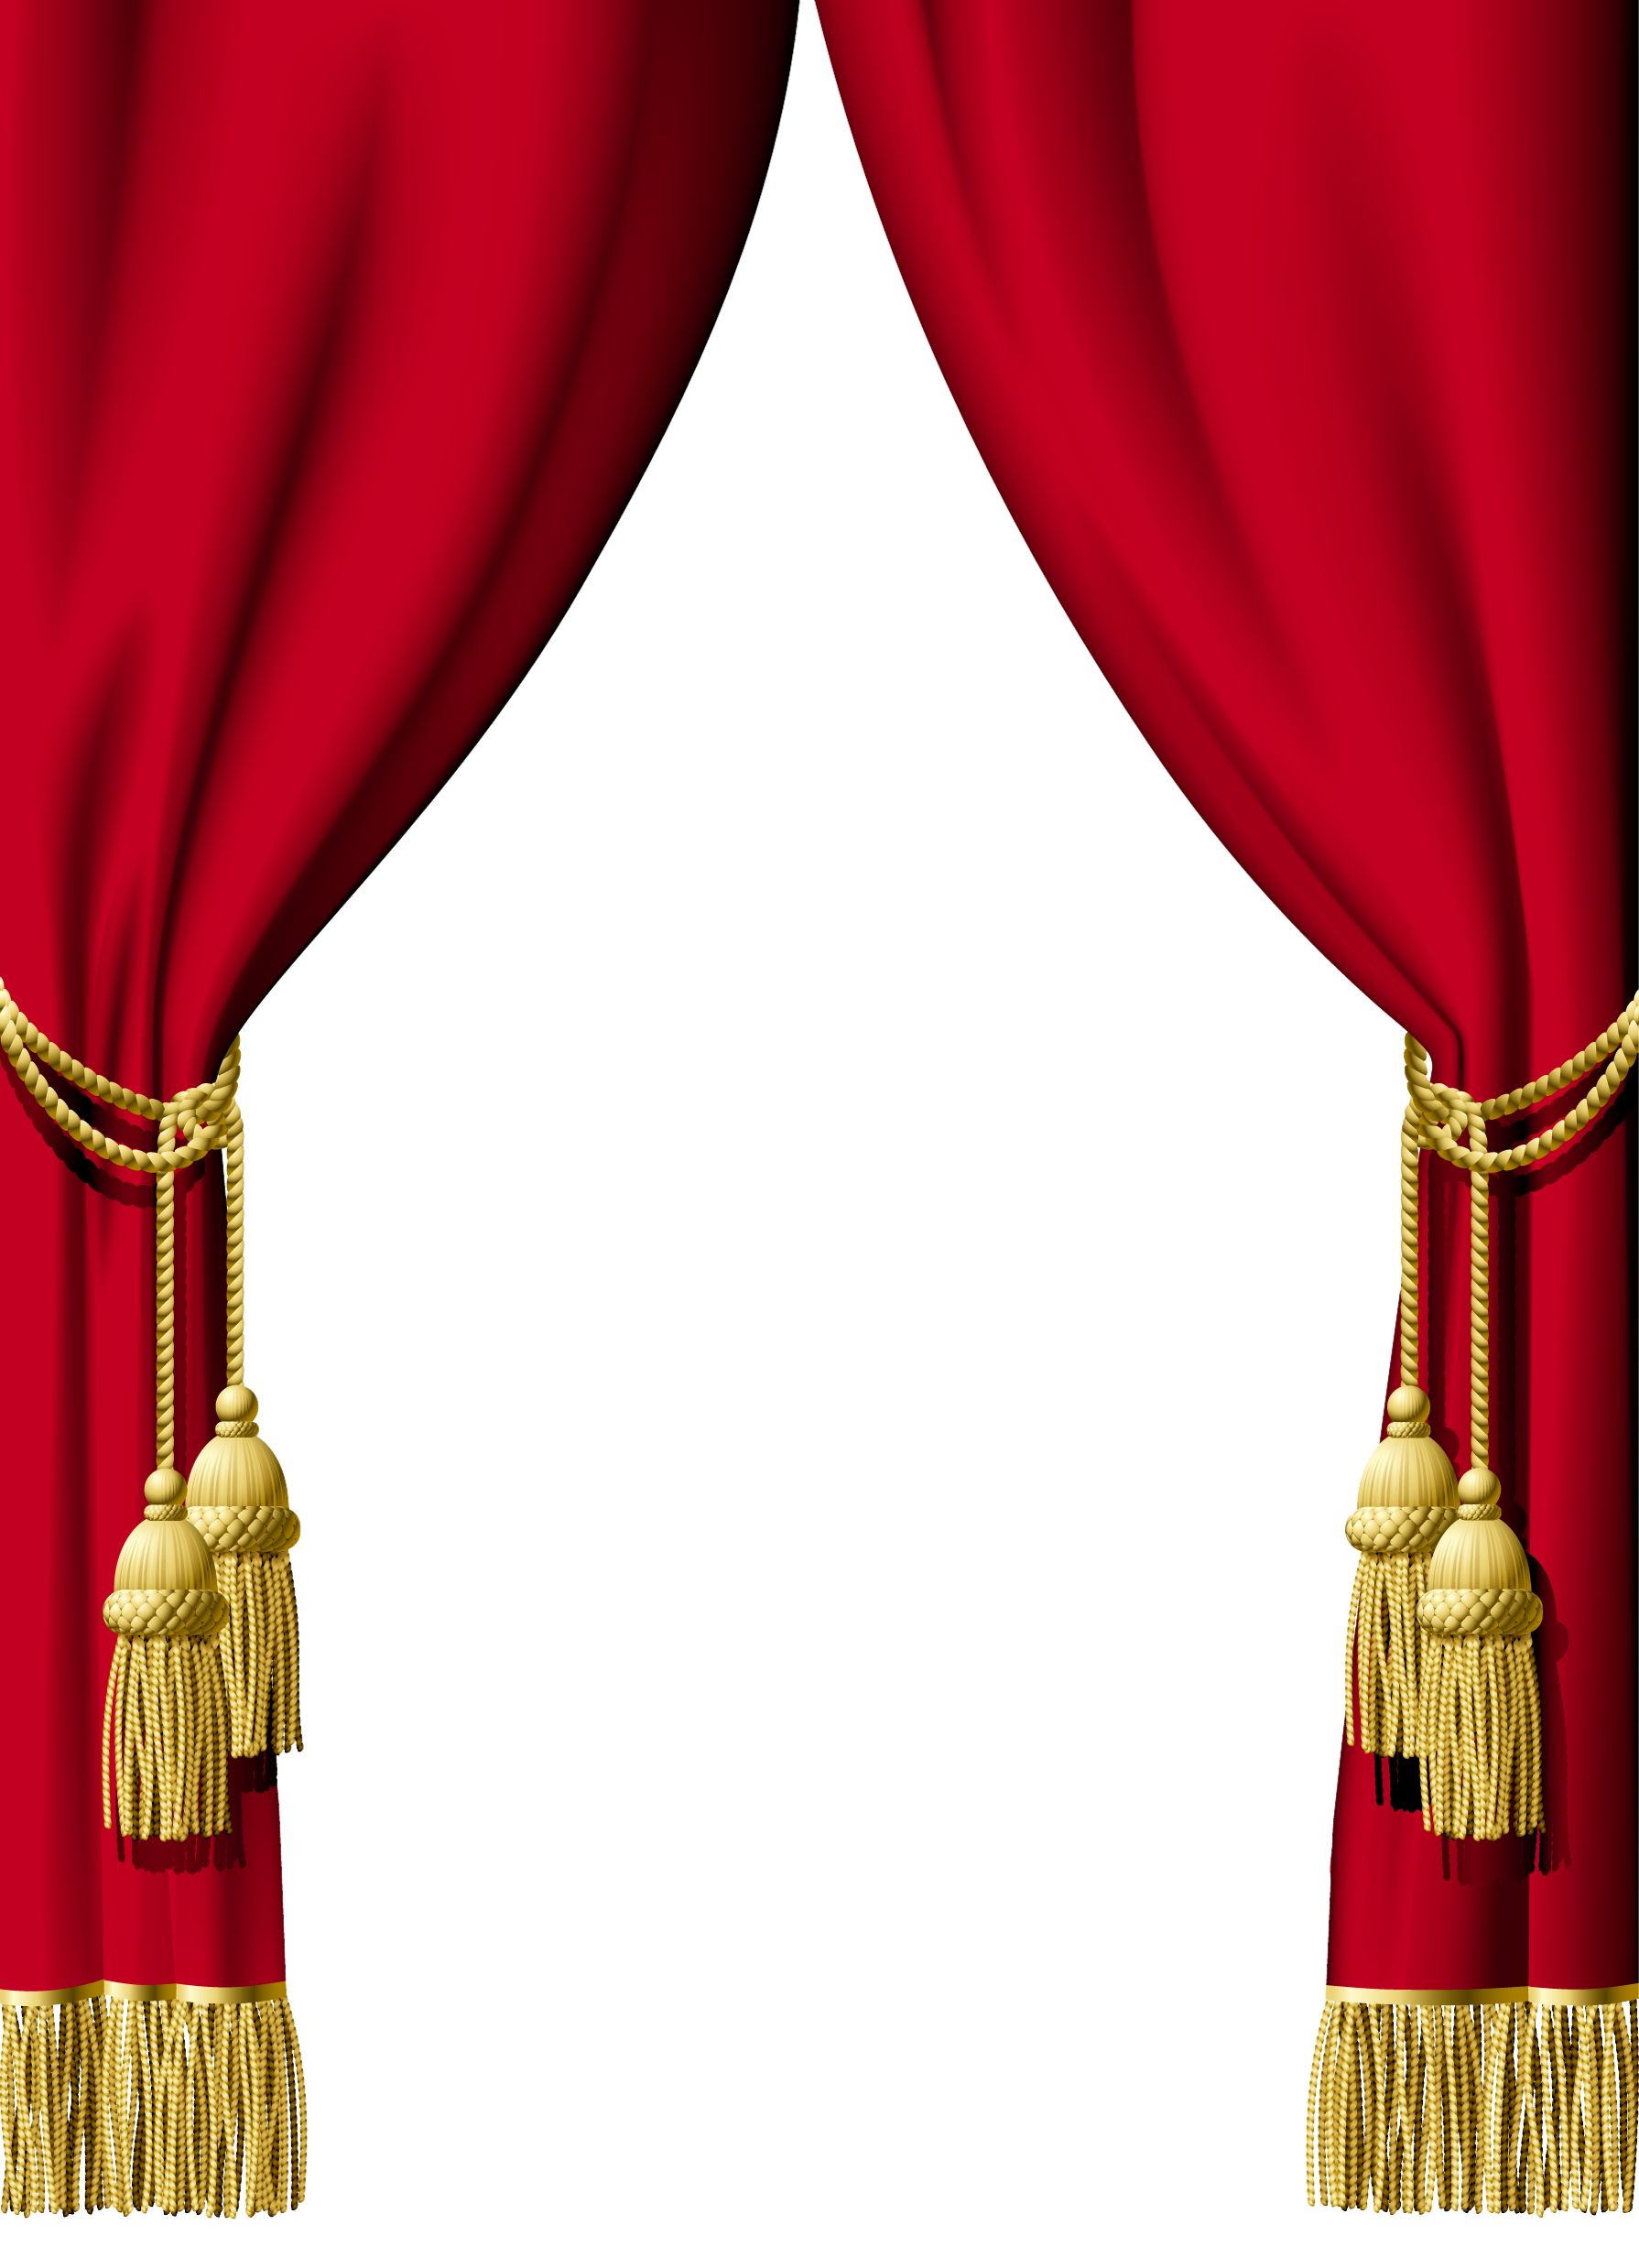 Theatre clipart stage backgro